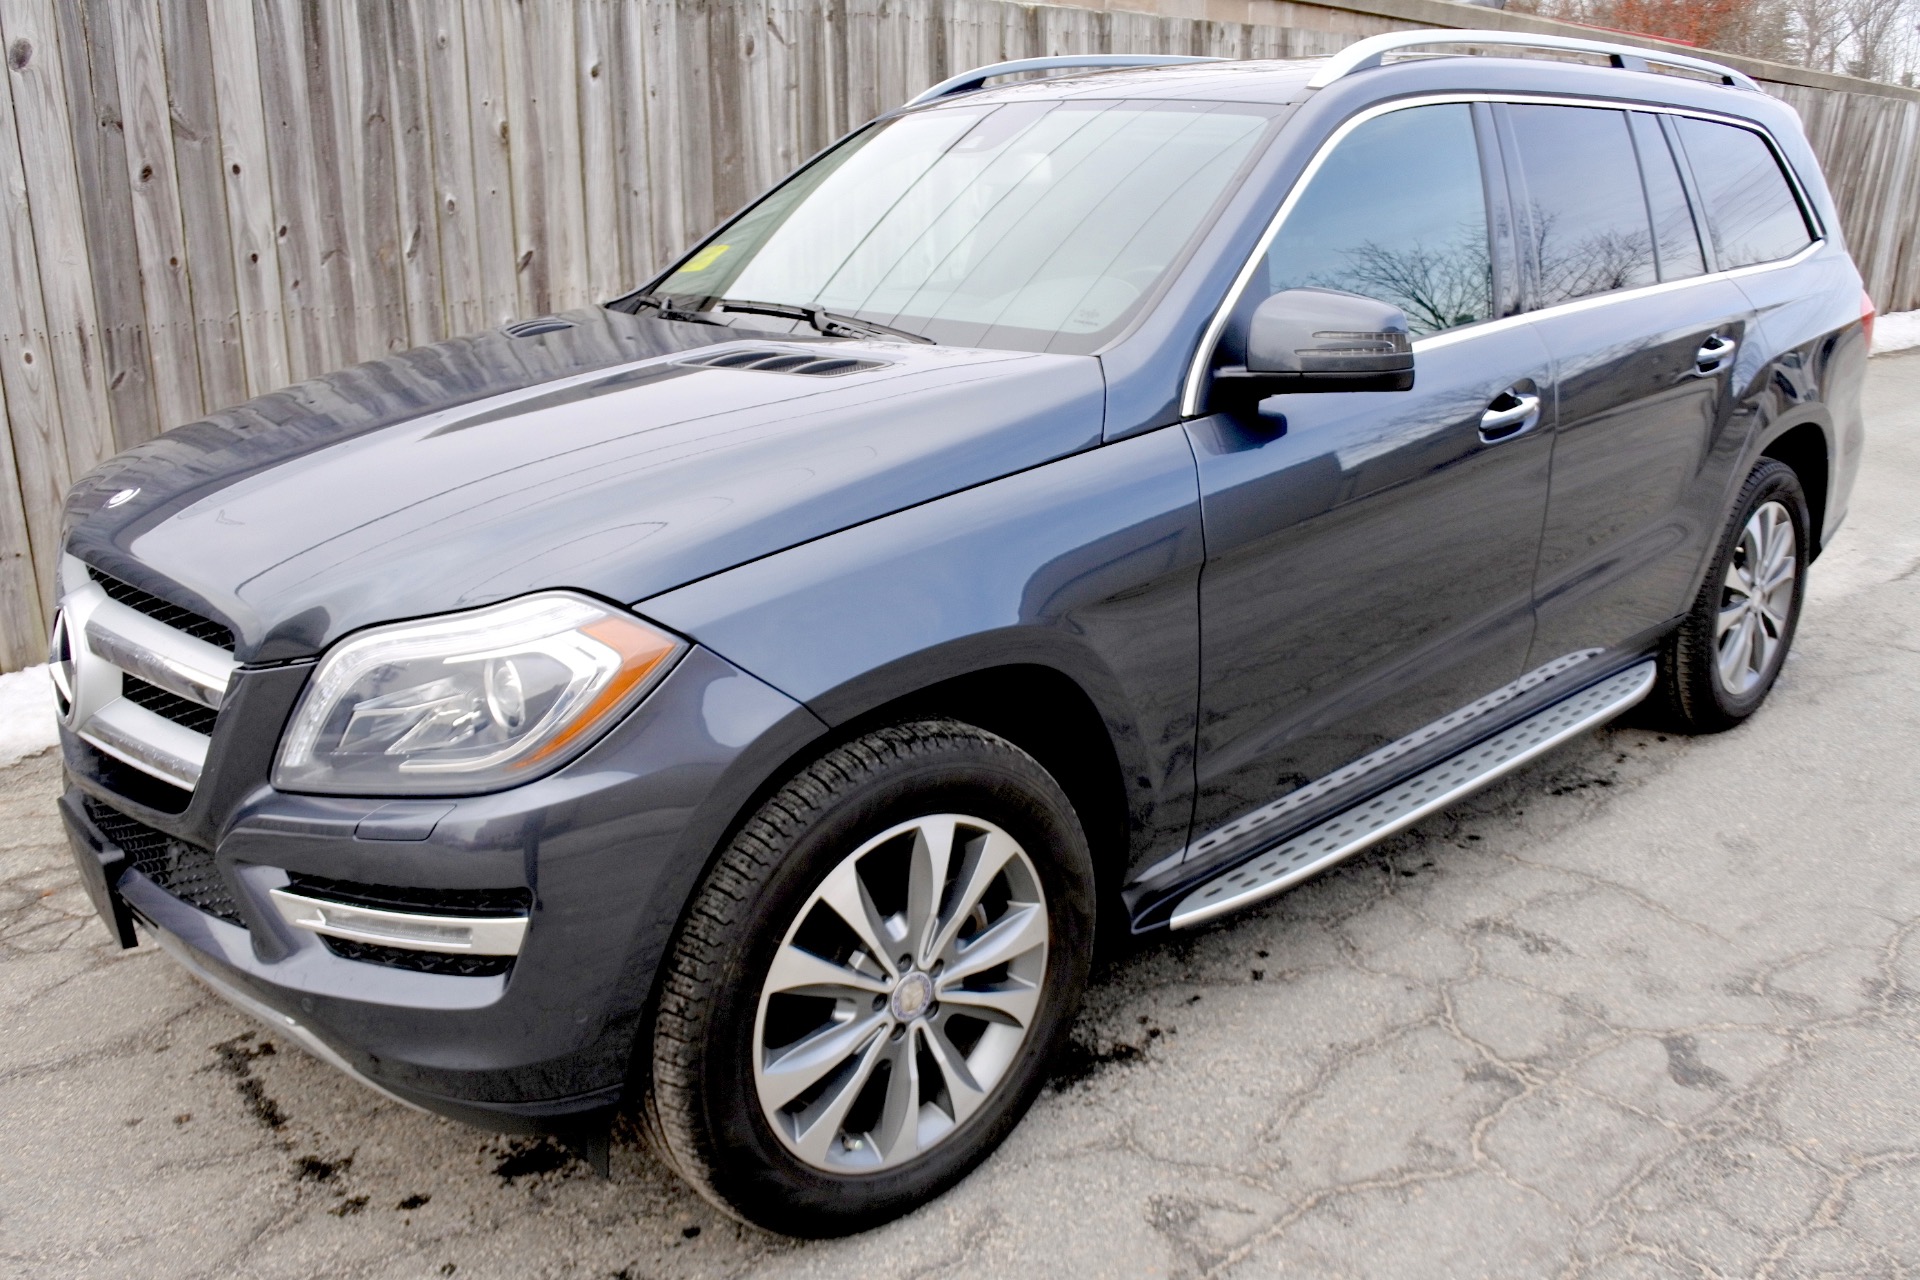 Used MercedesBenz GL 450 for Sale Right Now  Autotrader